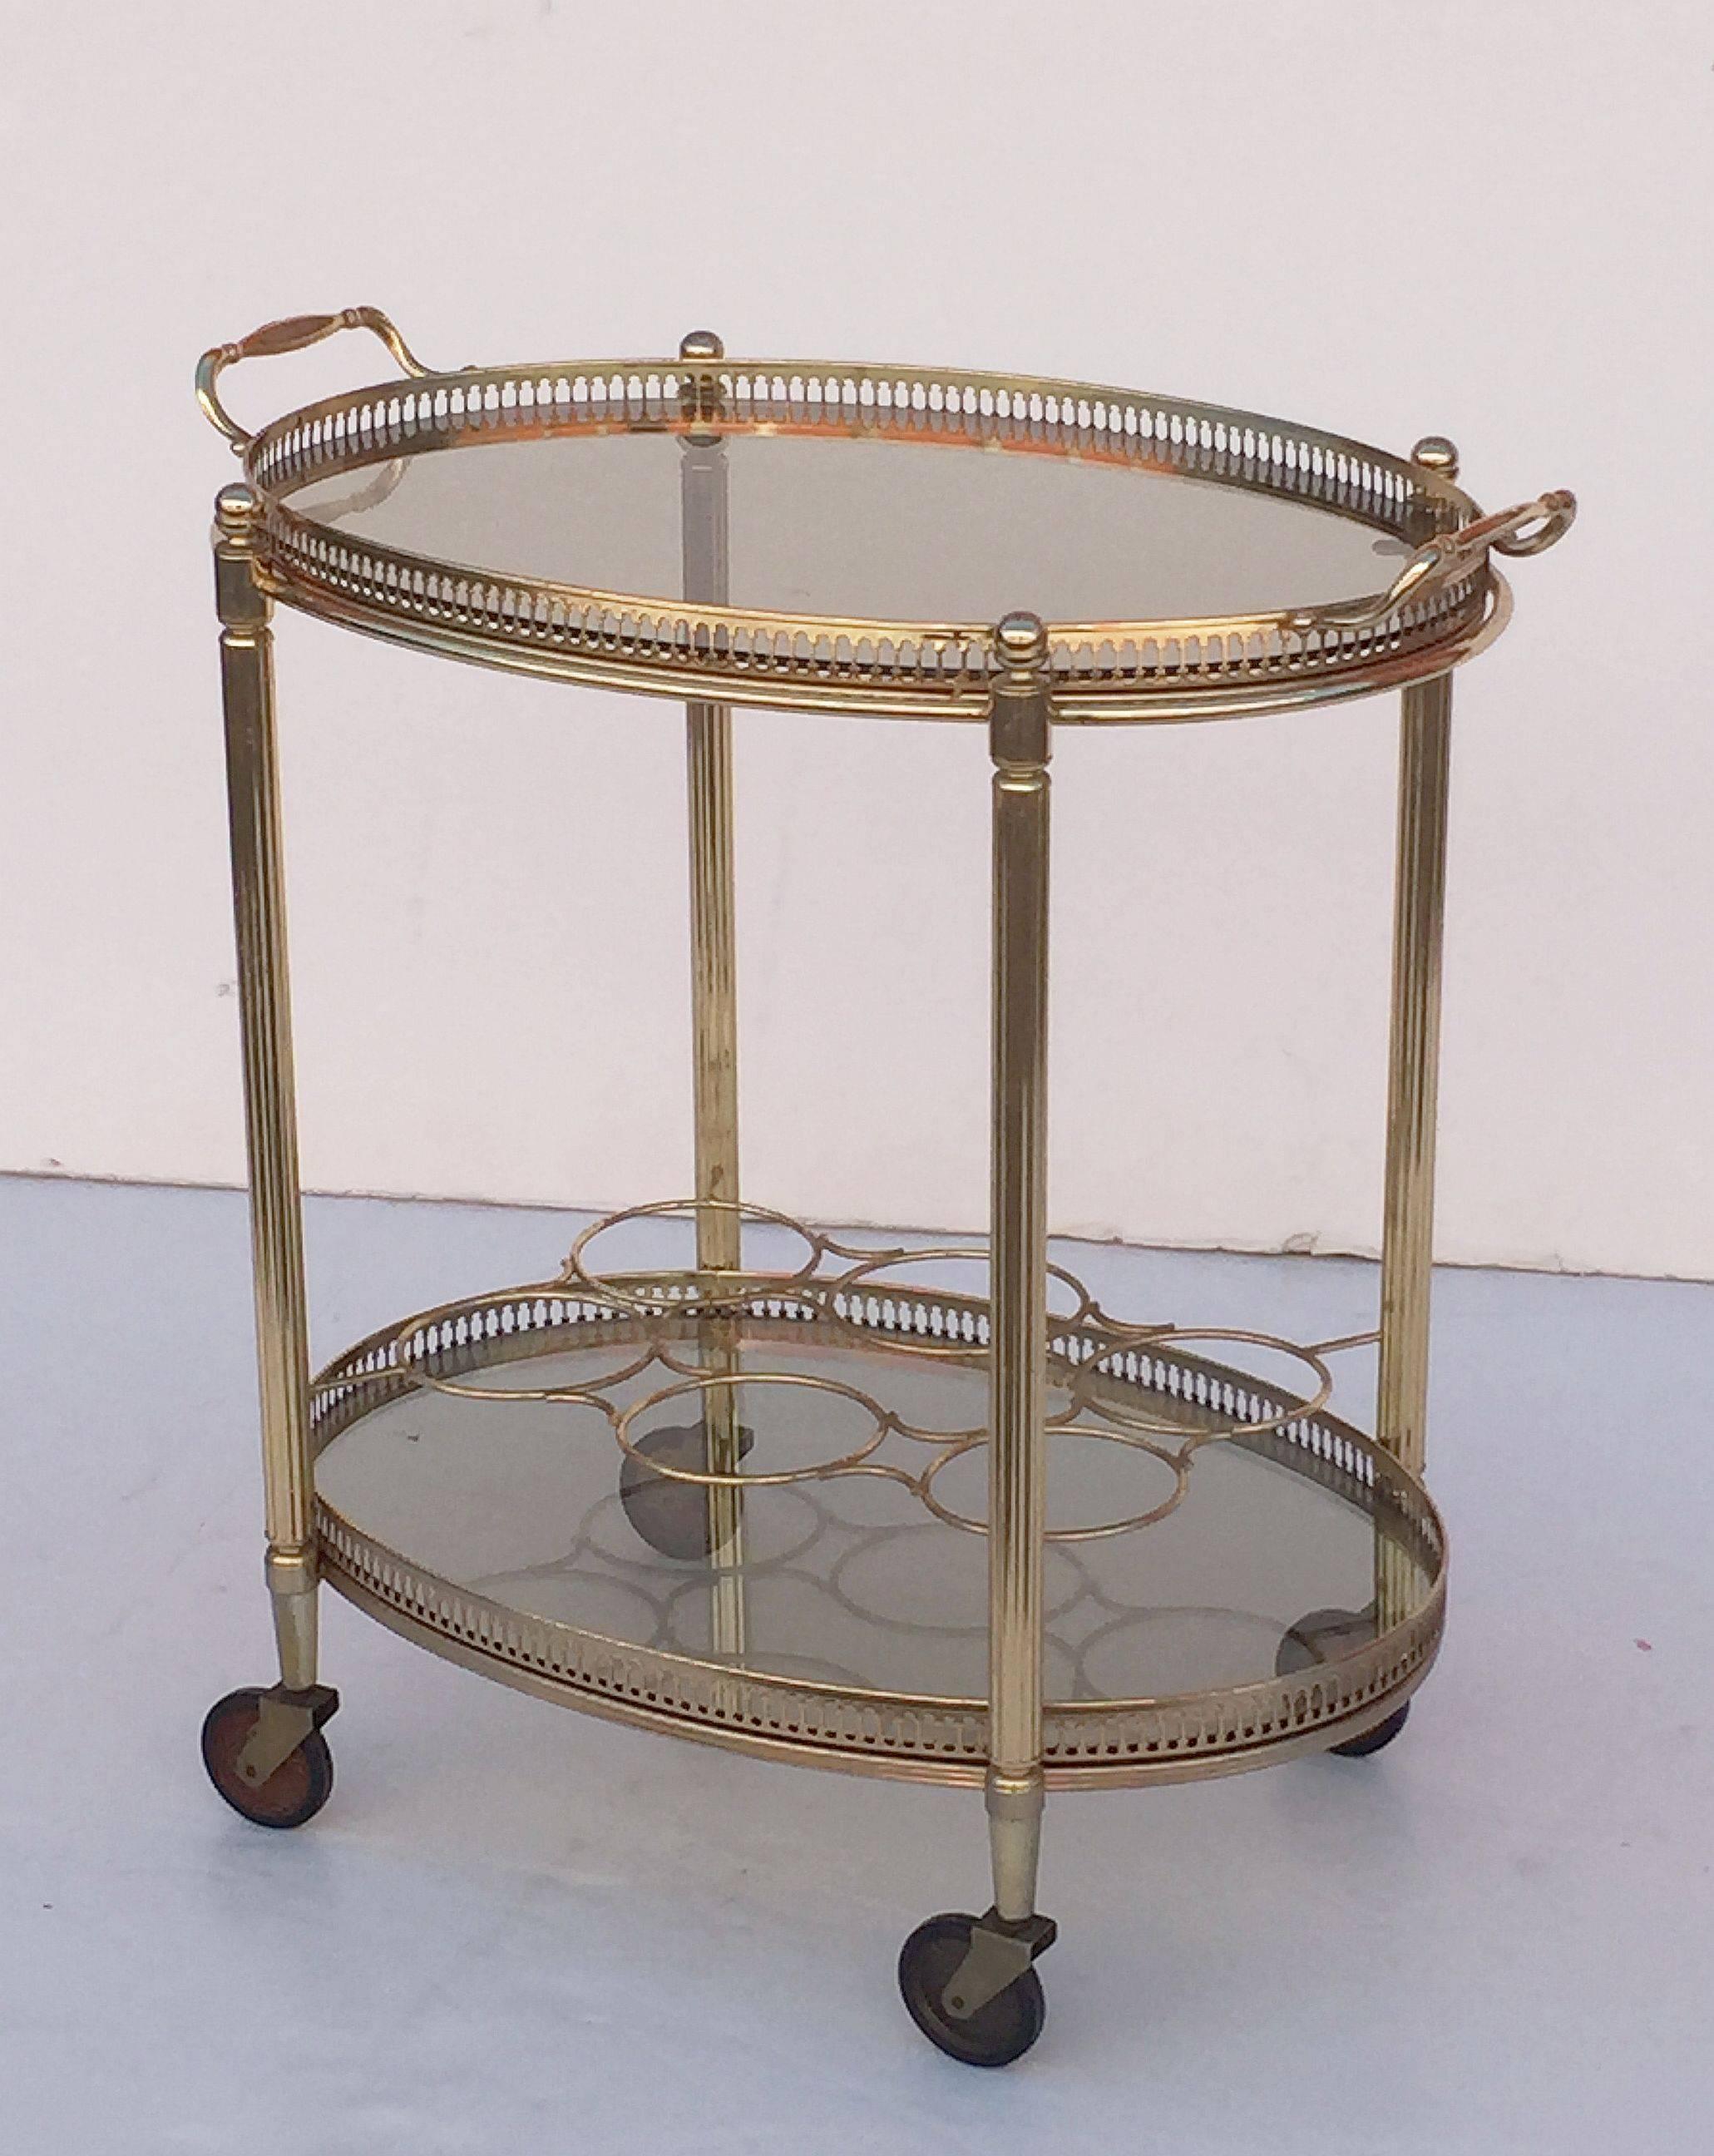 A vintage French oval bar cart table or serving trolley in brass and featuring two smoked glass tiers, each with pierced galleries, with bottle rack for six bottles on second tier, on rolling caster wheels. 

The top tier is removable for use as a